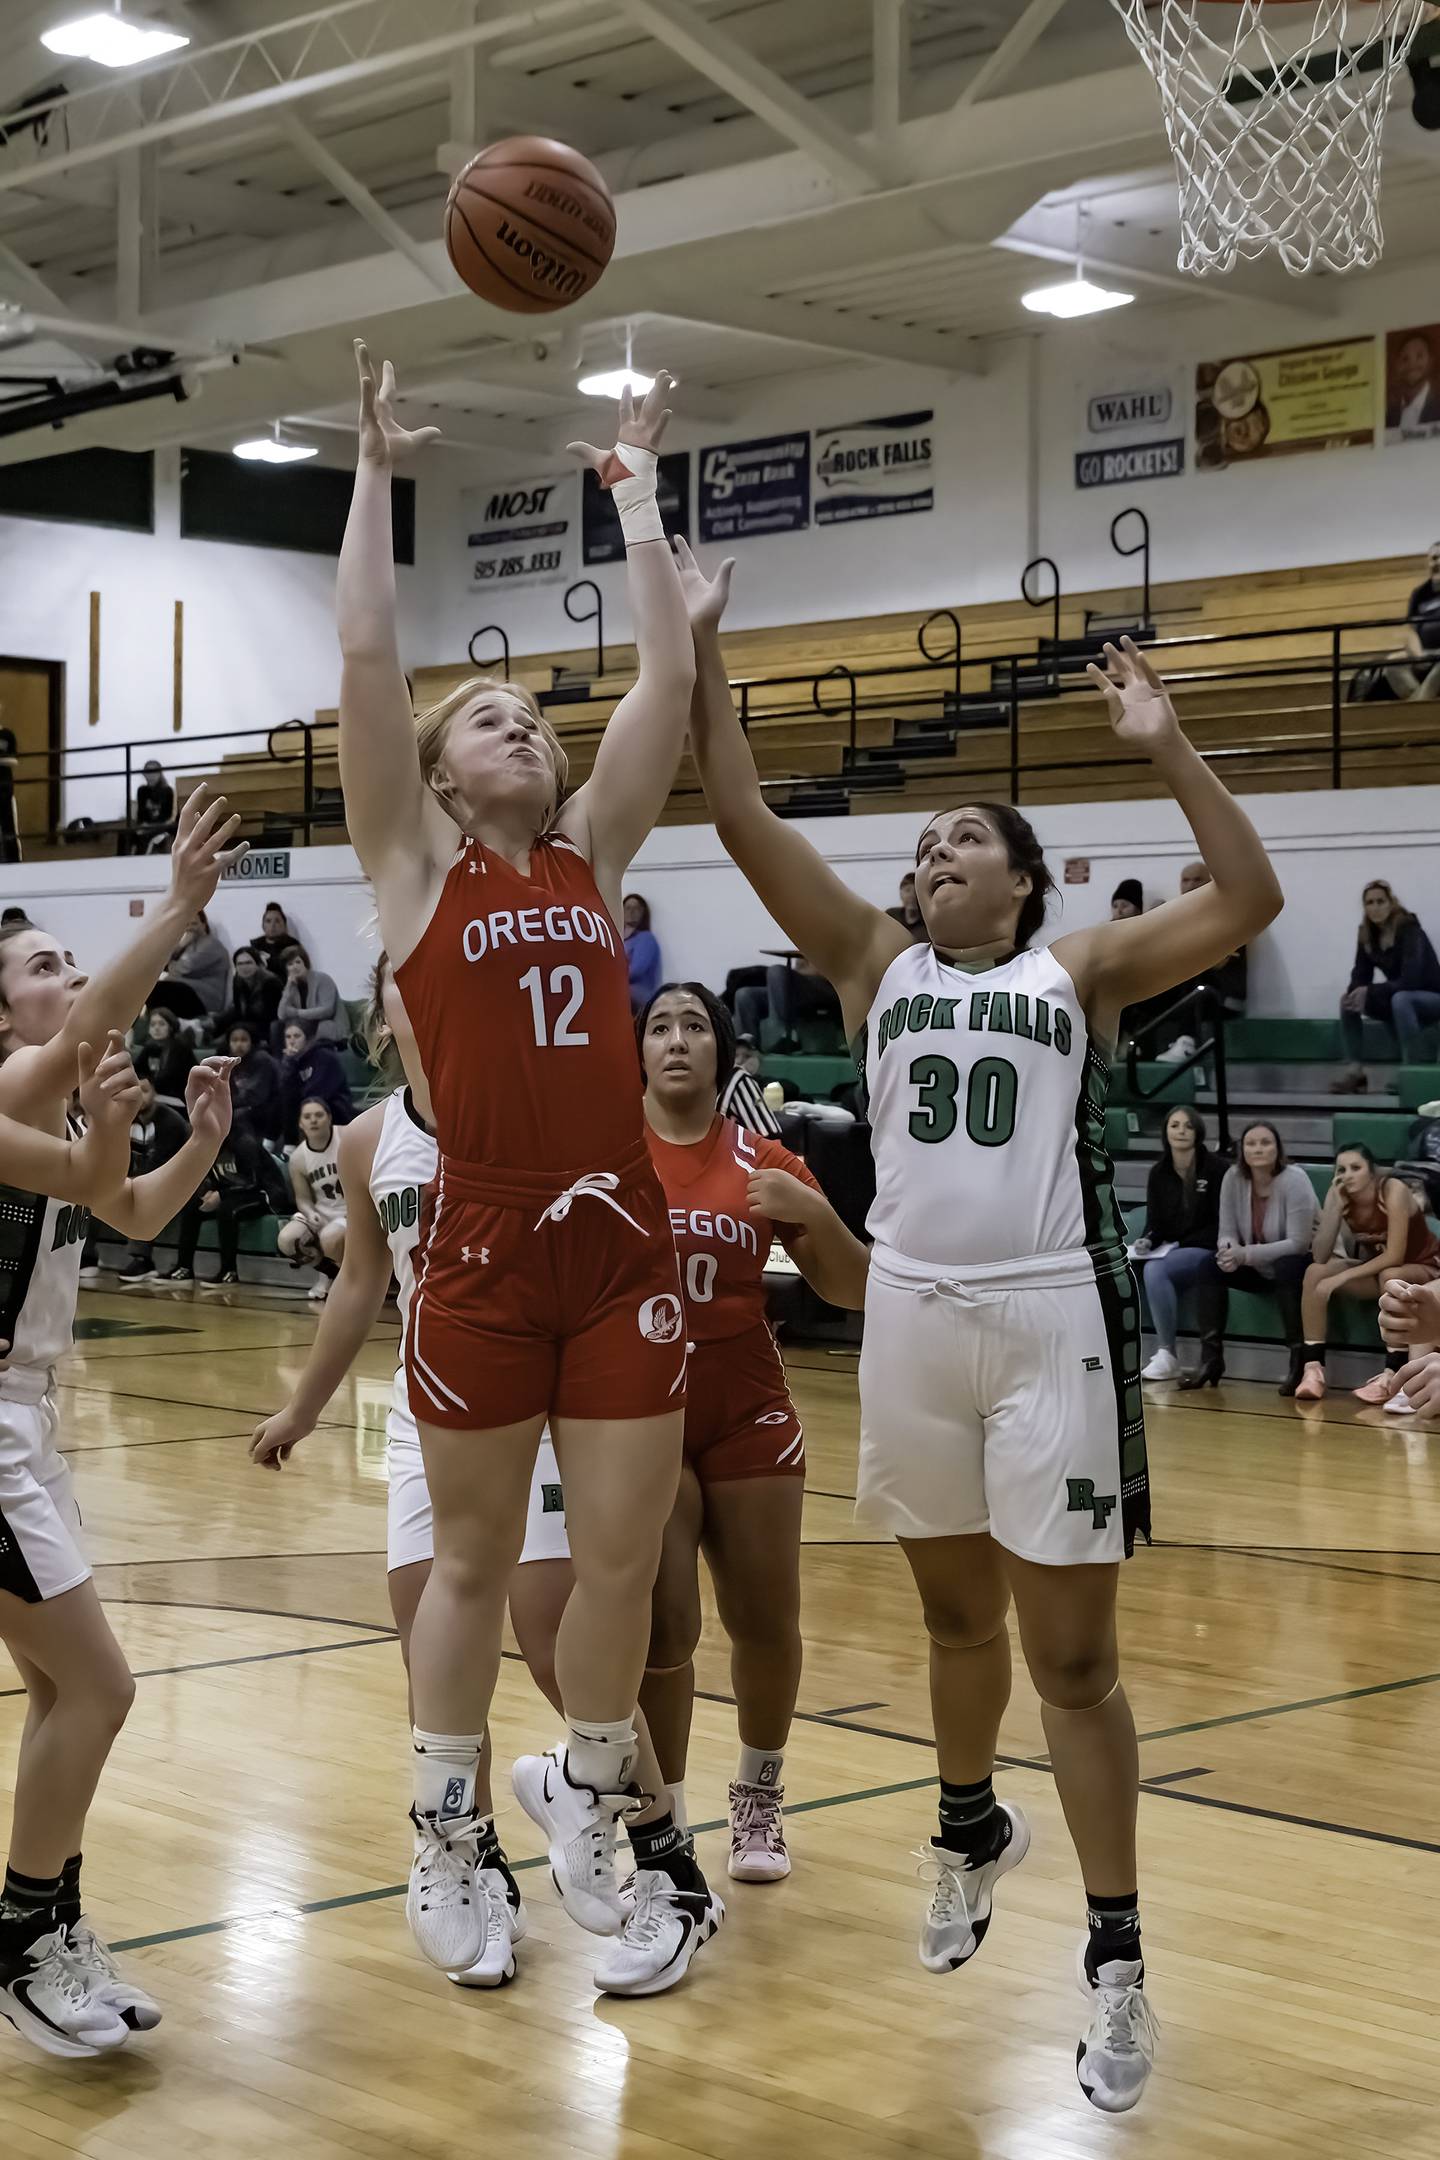 Oregon's Liz Mois (12) goes up for a rebound over Rock Falls' Taylor Reyna (30) during their Big Northern Conference game Friday night at Tabor Gym.